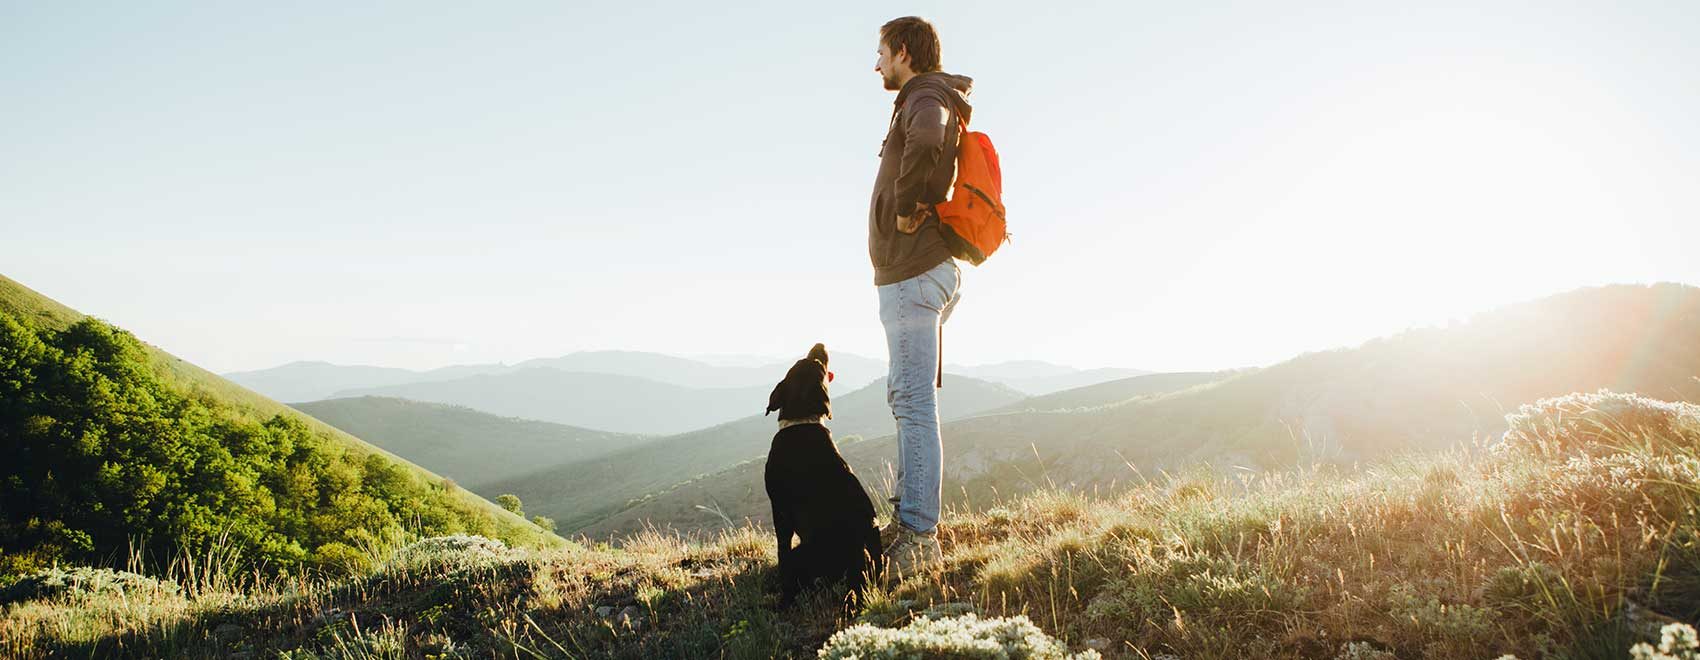 man outdoors with dog